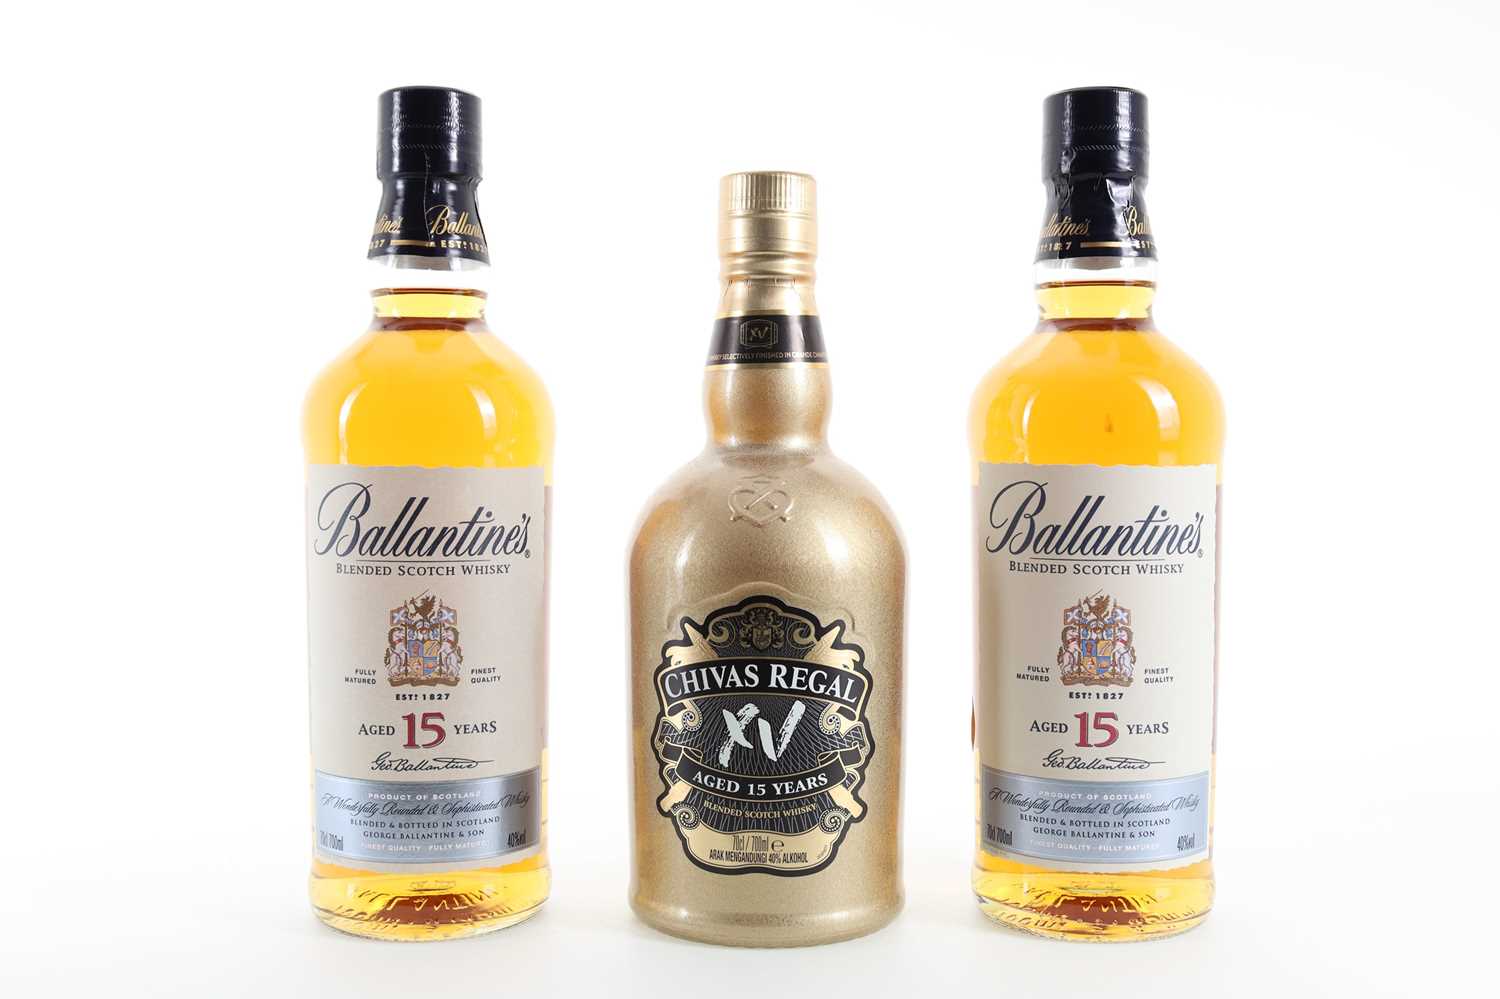 2 BOTTLES OF BALLANTINE'S 15 YEAR OLD AND CHIVAS REGAL 15 YEAR OLD BLENDED WHISKY